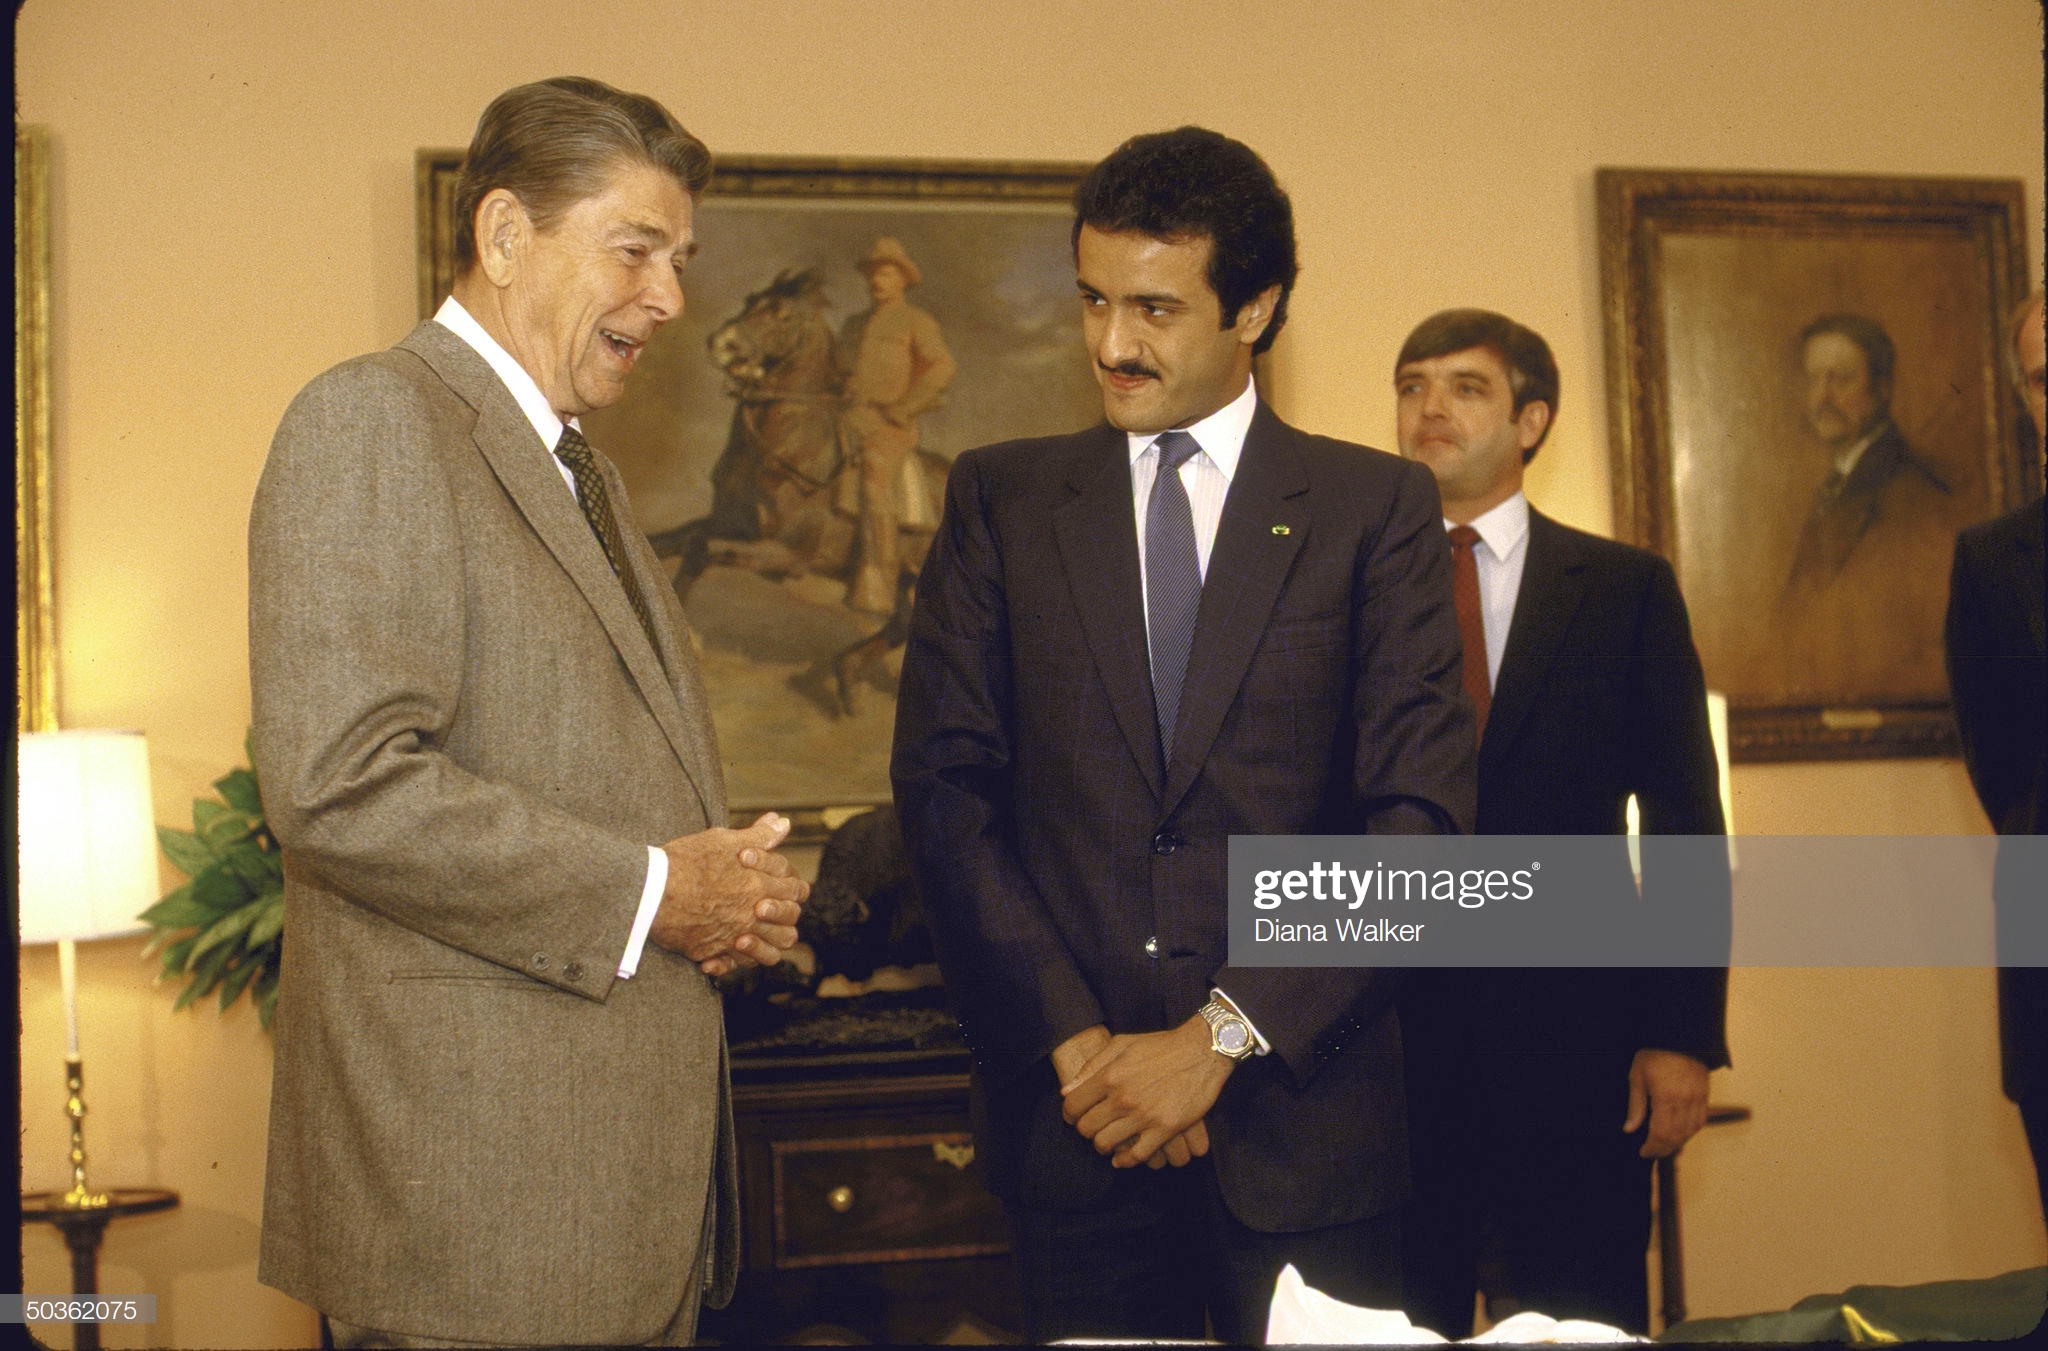 pres-ronald-w-reagan-meeting-with-astronaut-saudi-prince-sultan-al-picture-id50362075